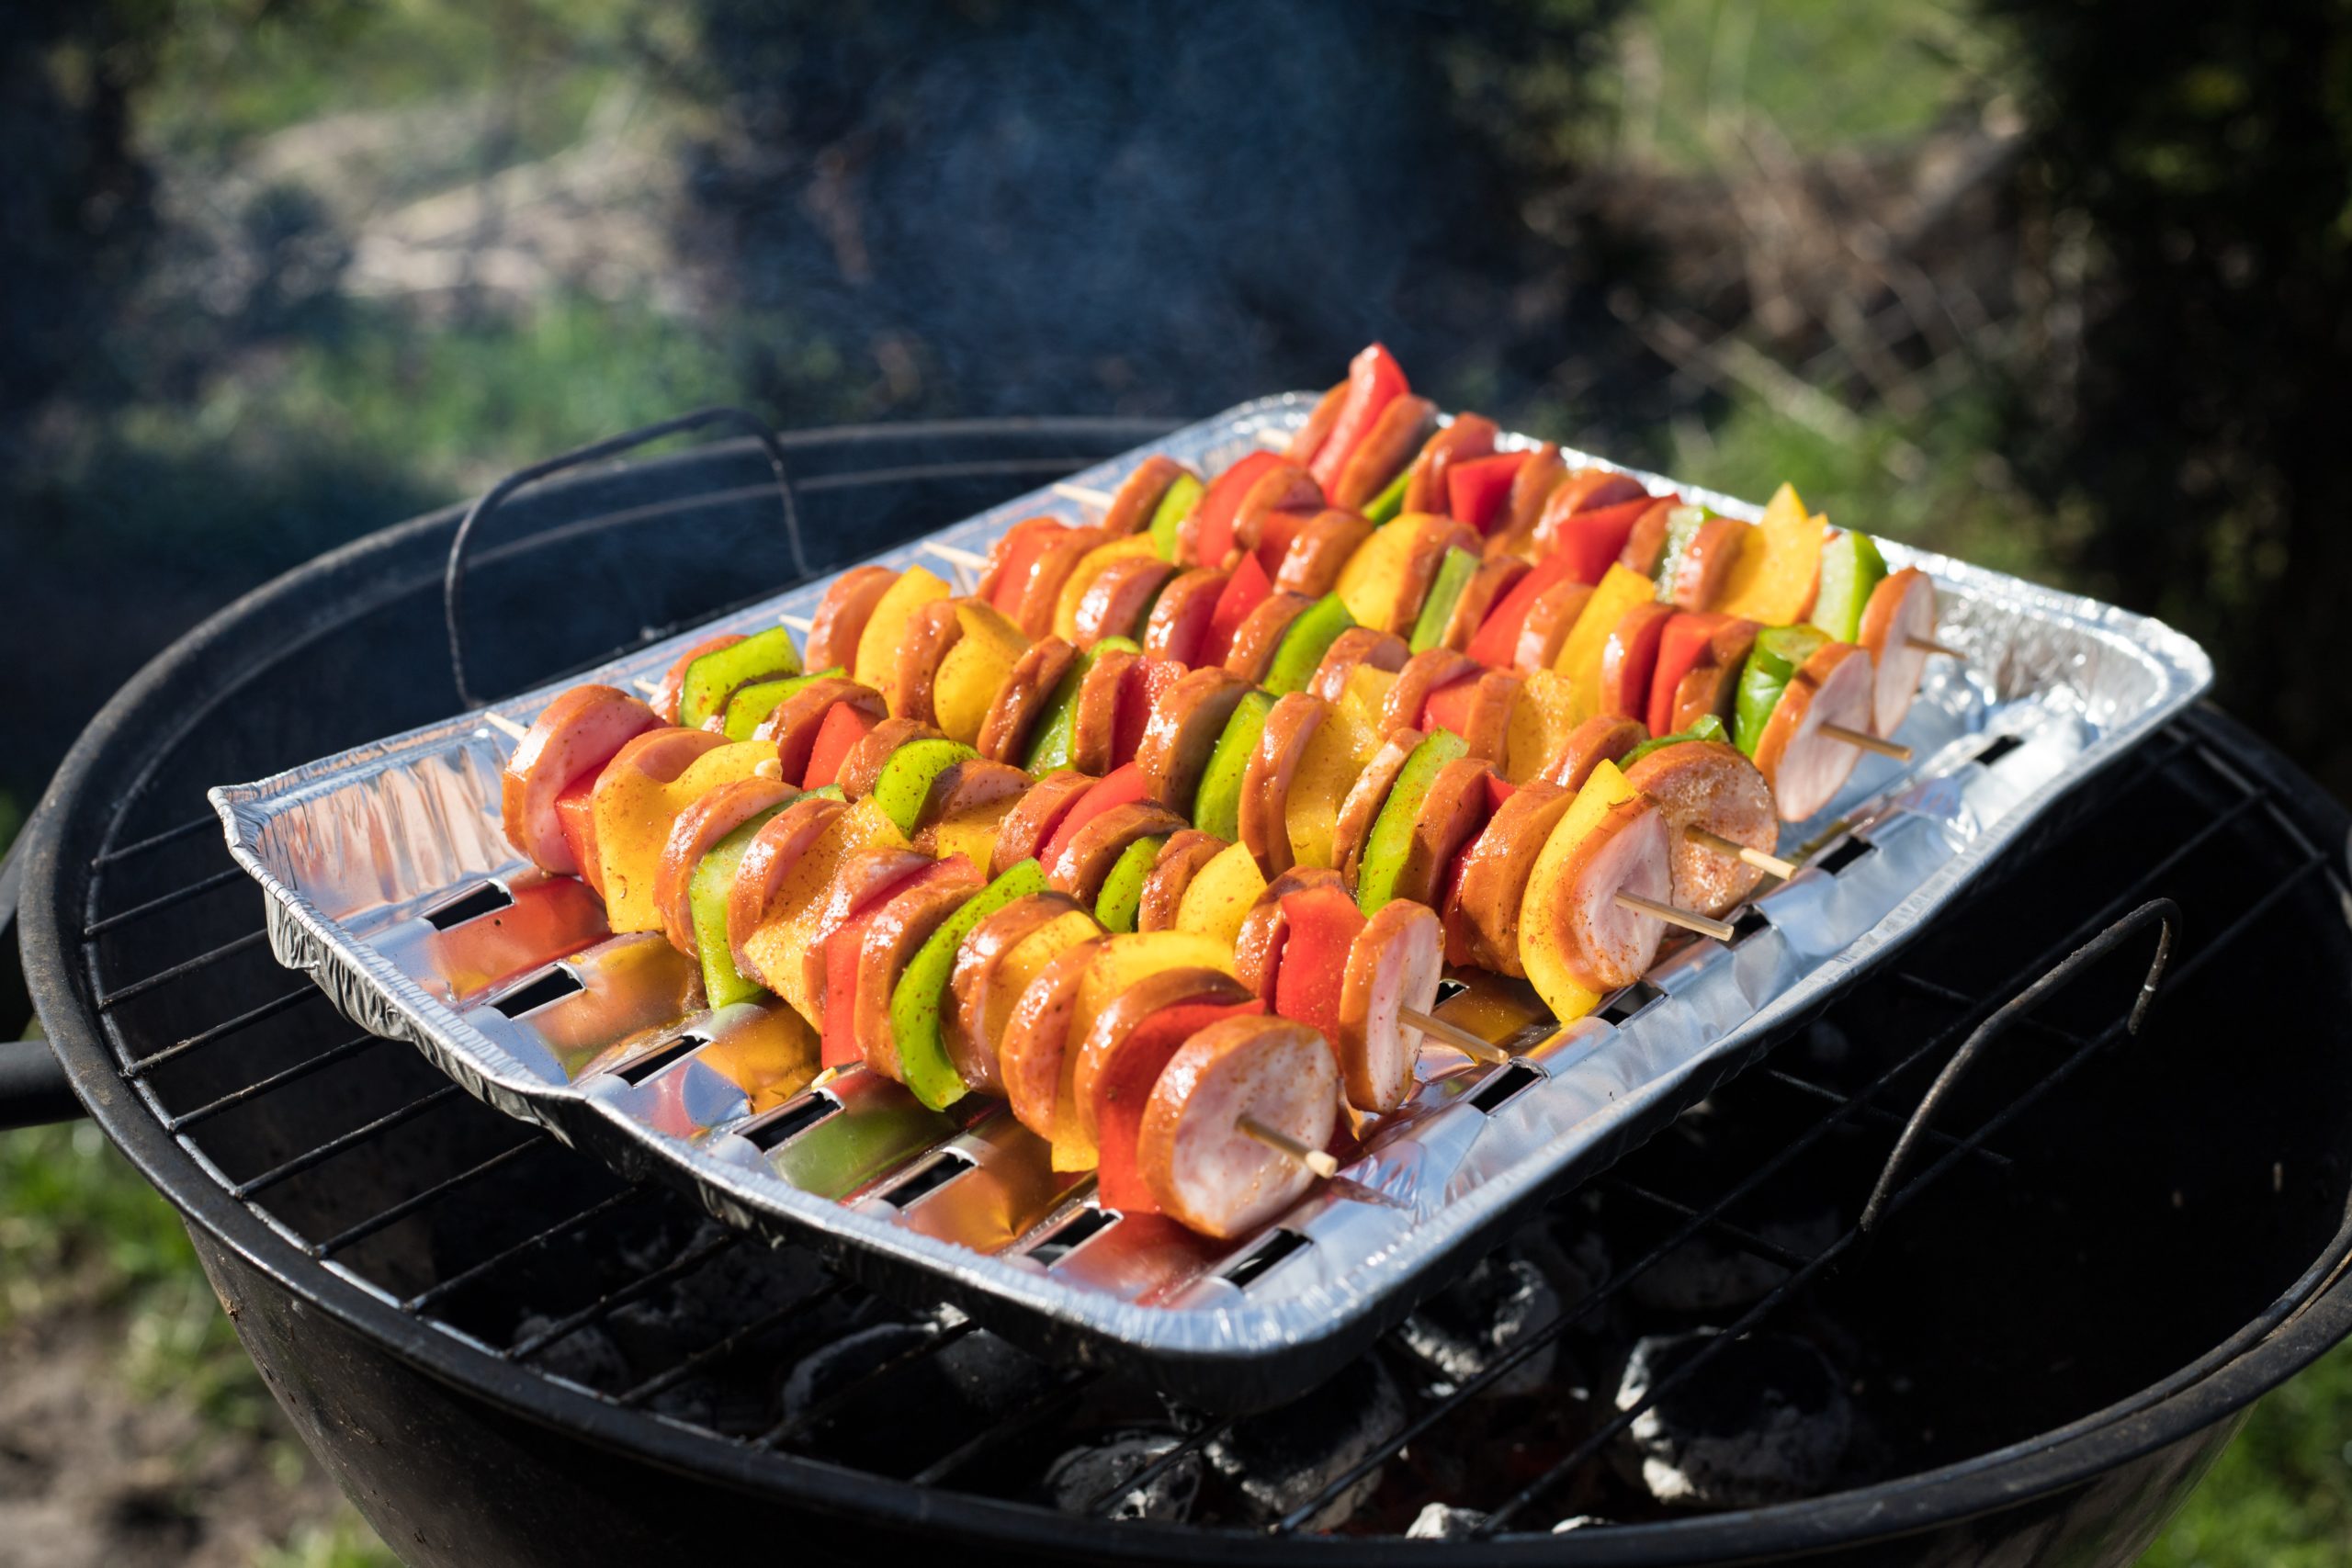 How to Use Charcoal Grill For Cooking?